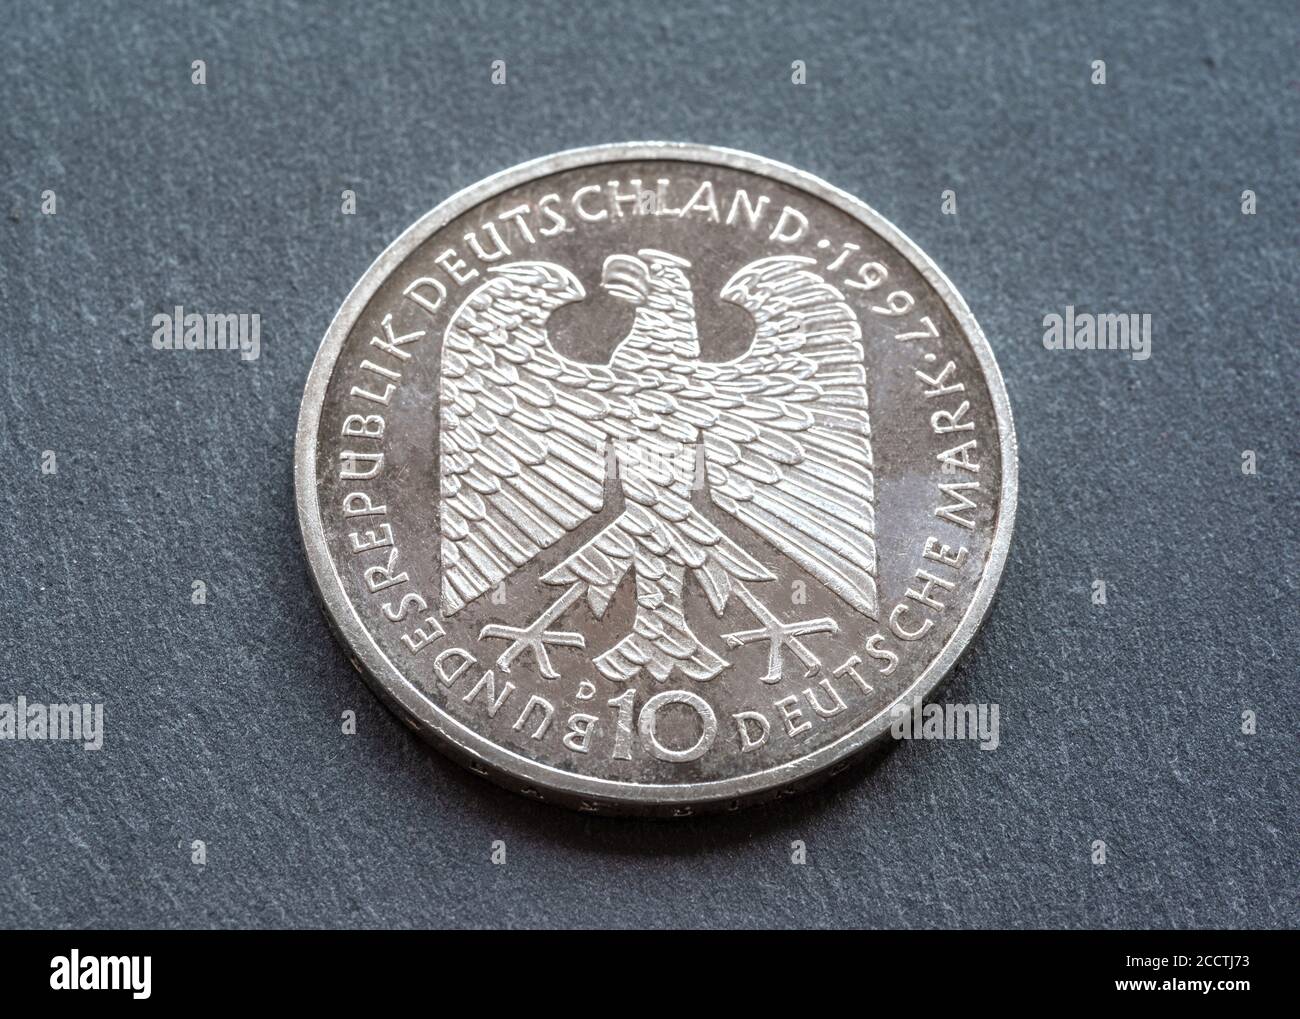 German Germany circulated silver memorial Heinrich Heine 10 DM discontinued Deutsche Mark coin dated 1997 slightly soiled Stock Photo